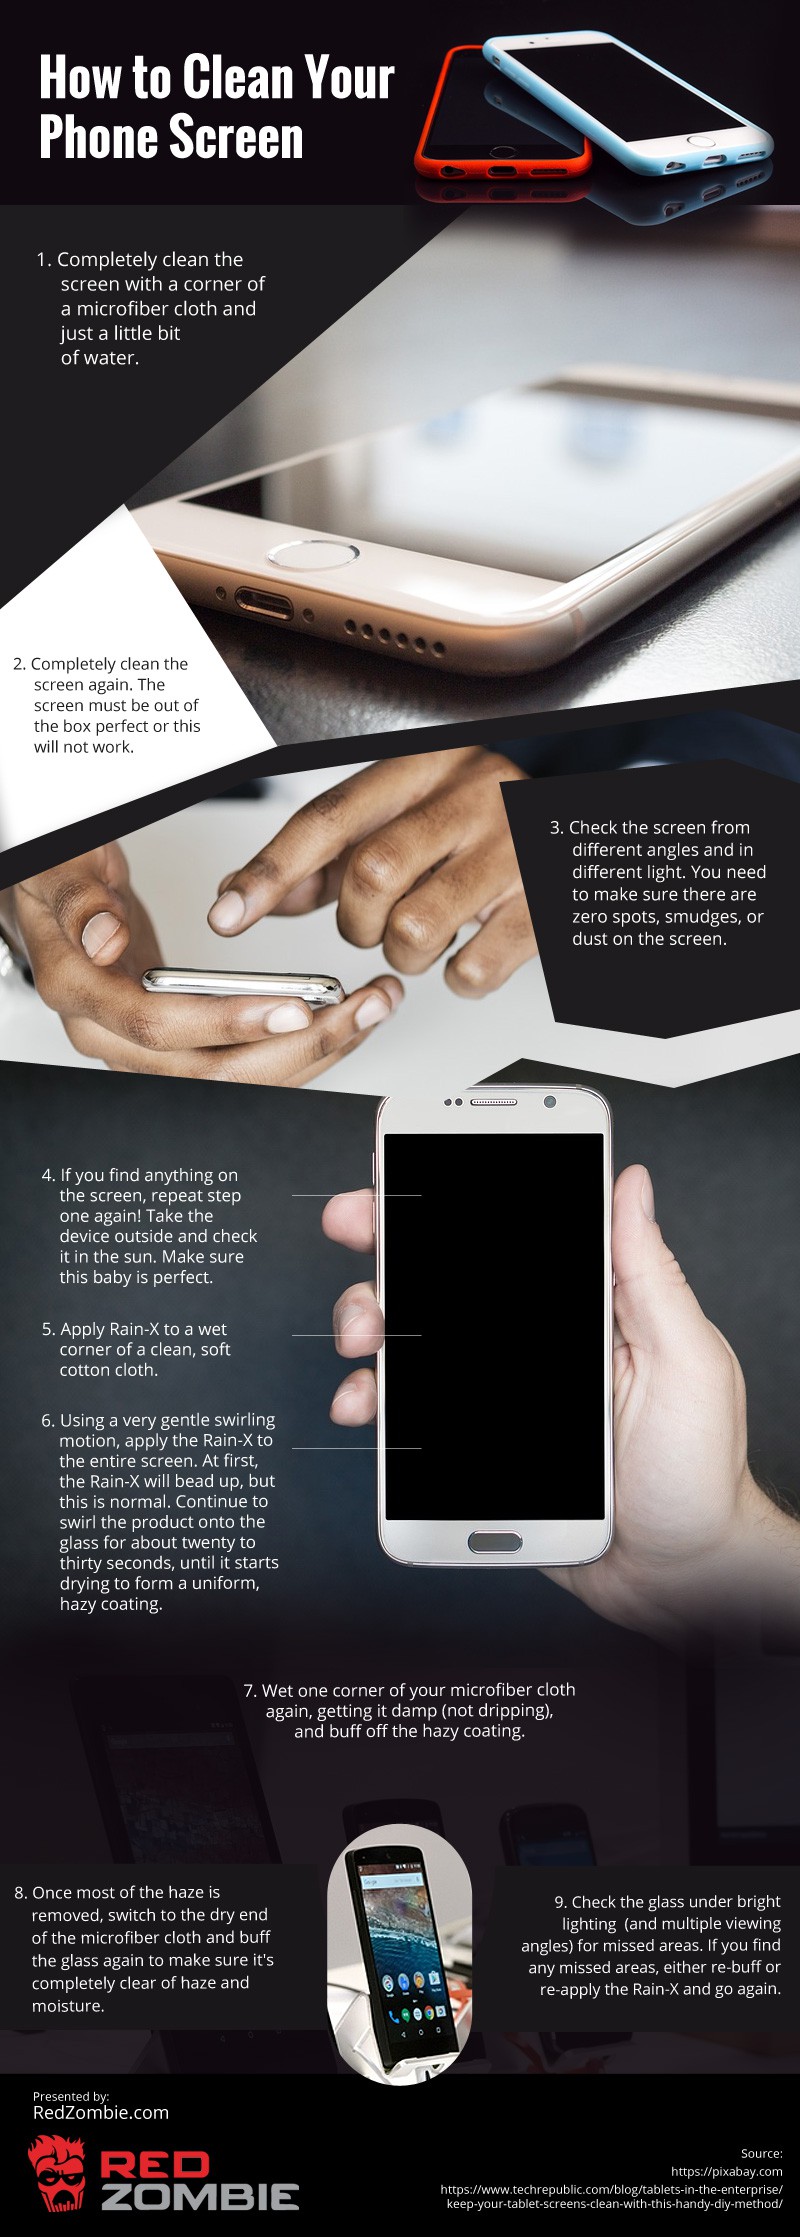 How-to-Clean-Your-Phone-Screen Infographic